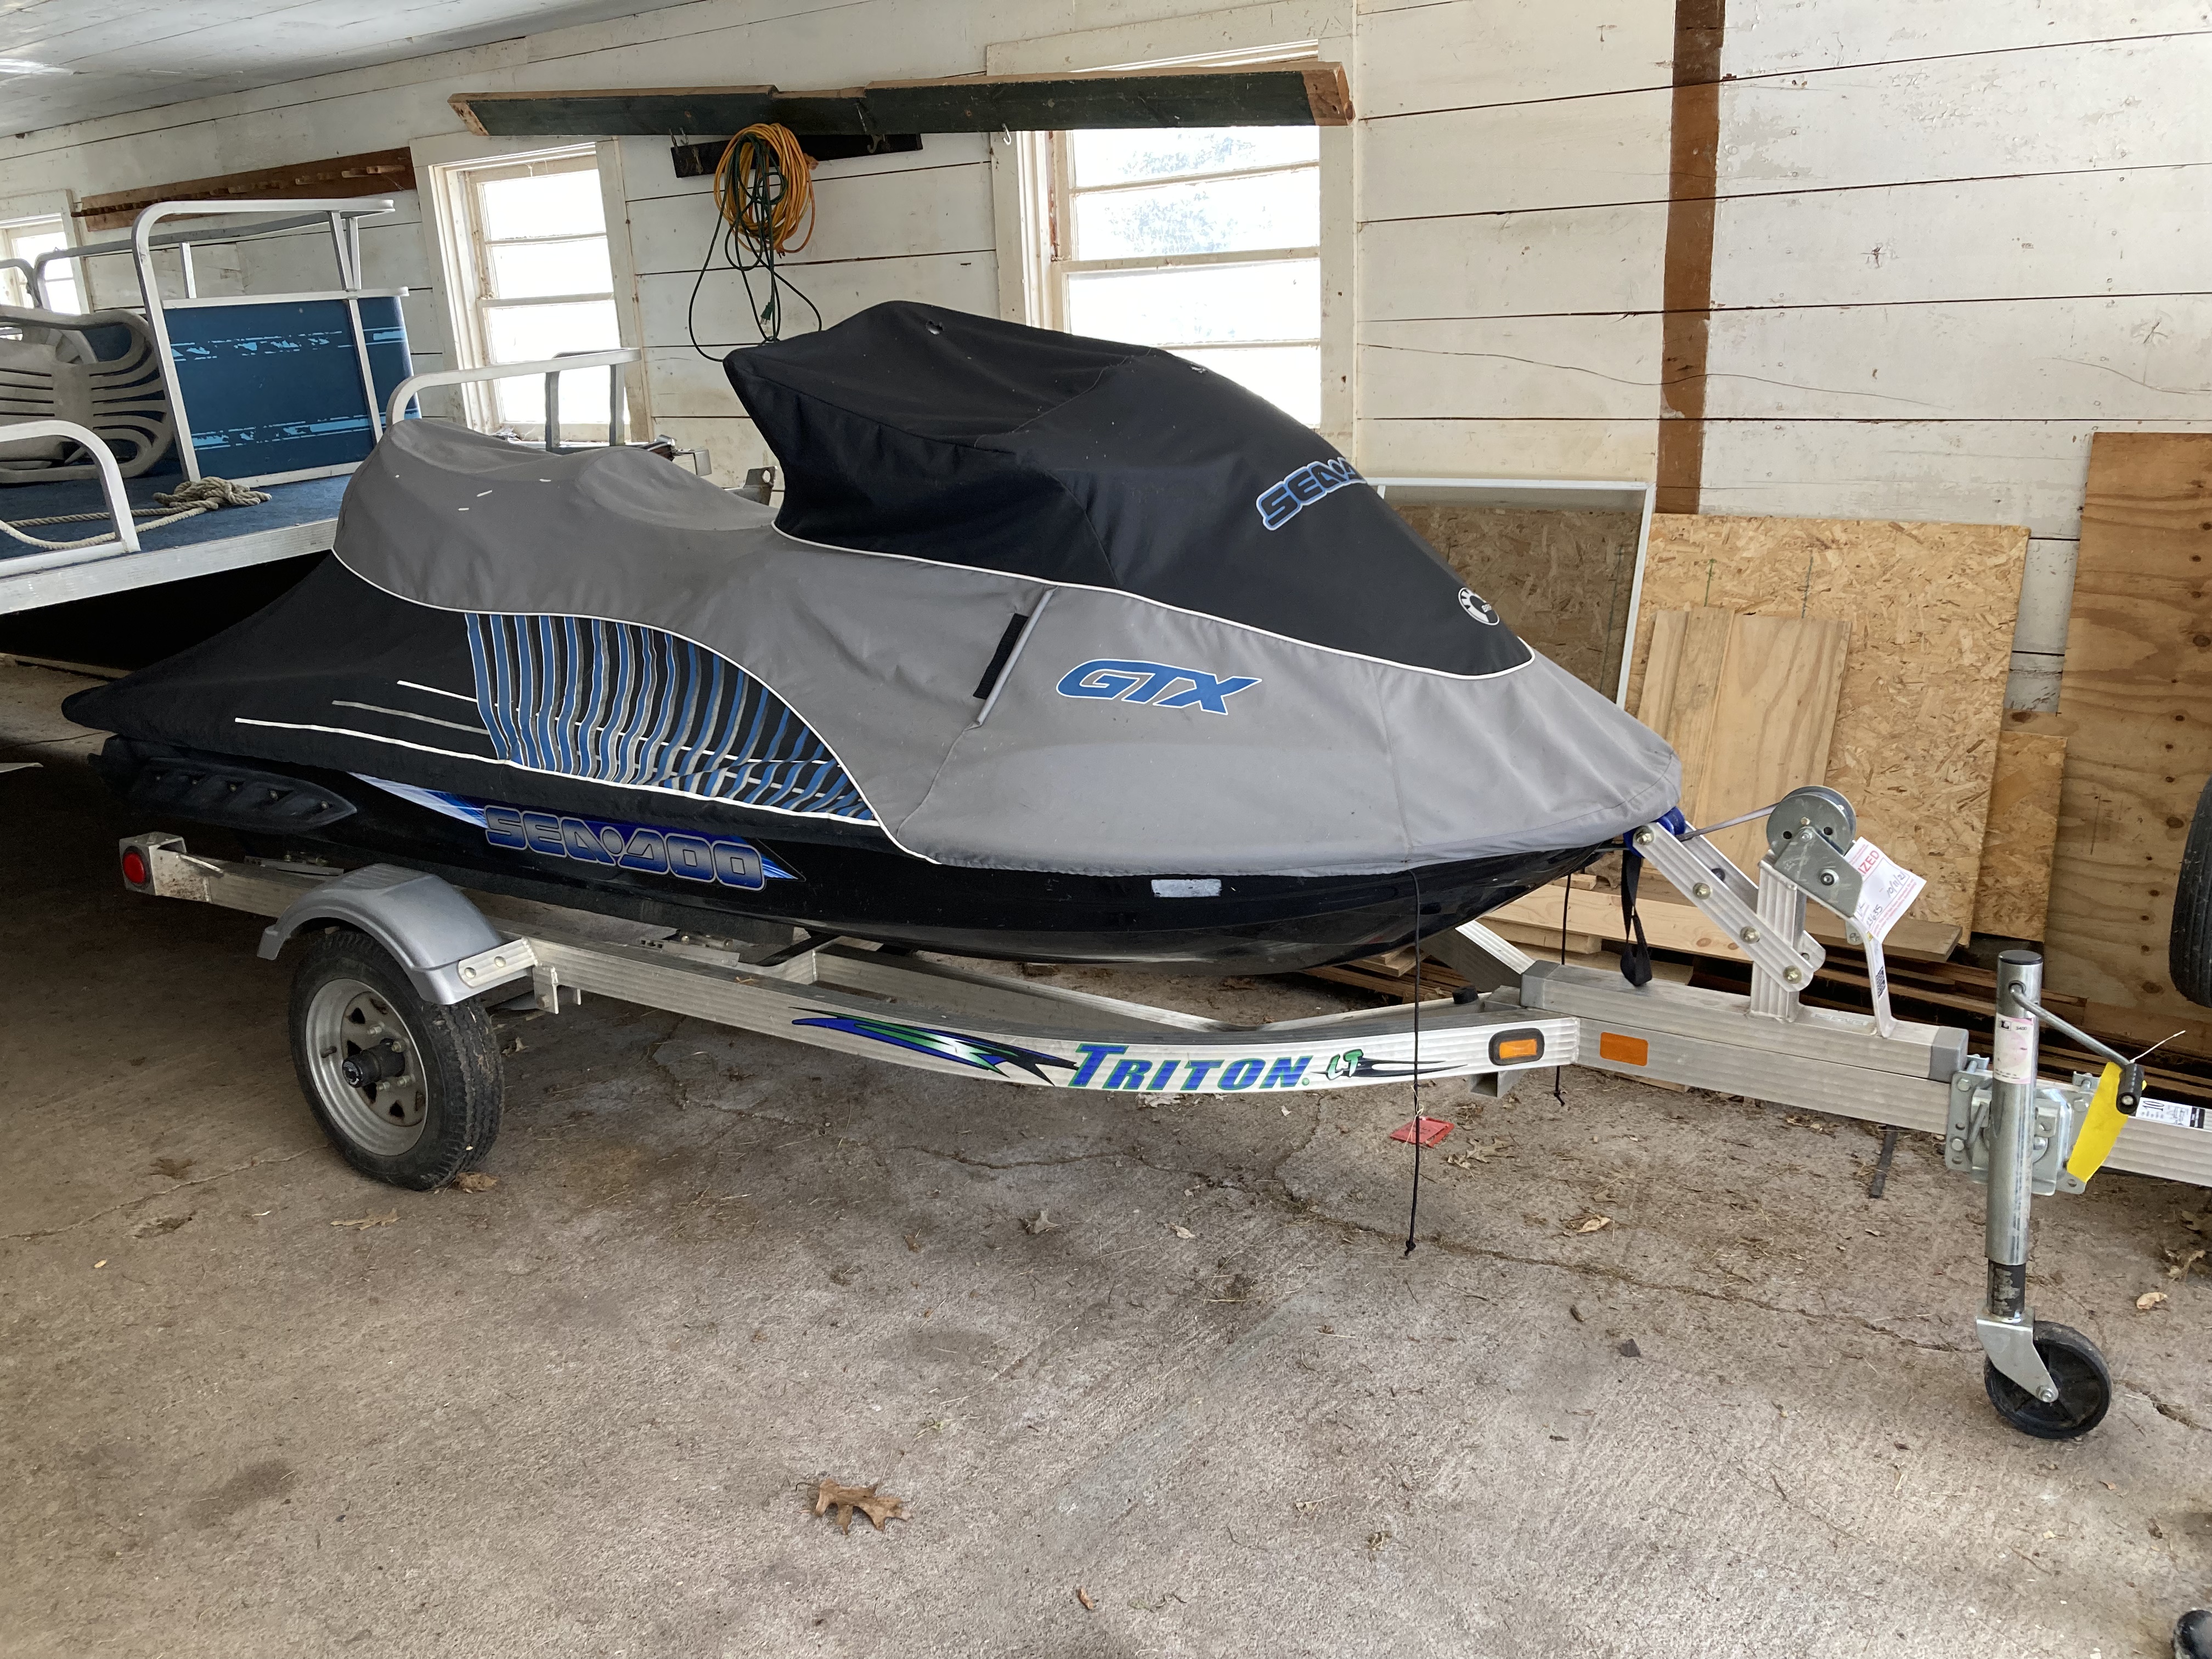 2007 10 foot Sea-Doo GTX limited PWC for sale in Maple Grove, MN - image 6 